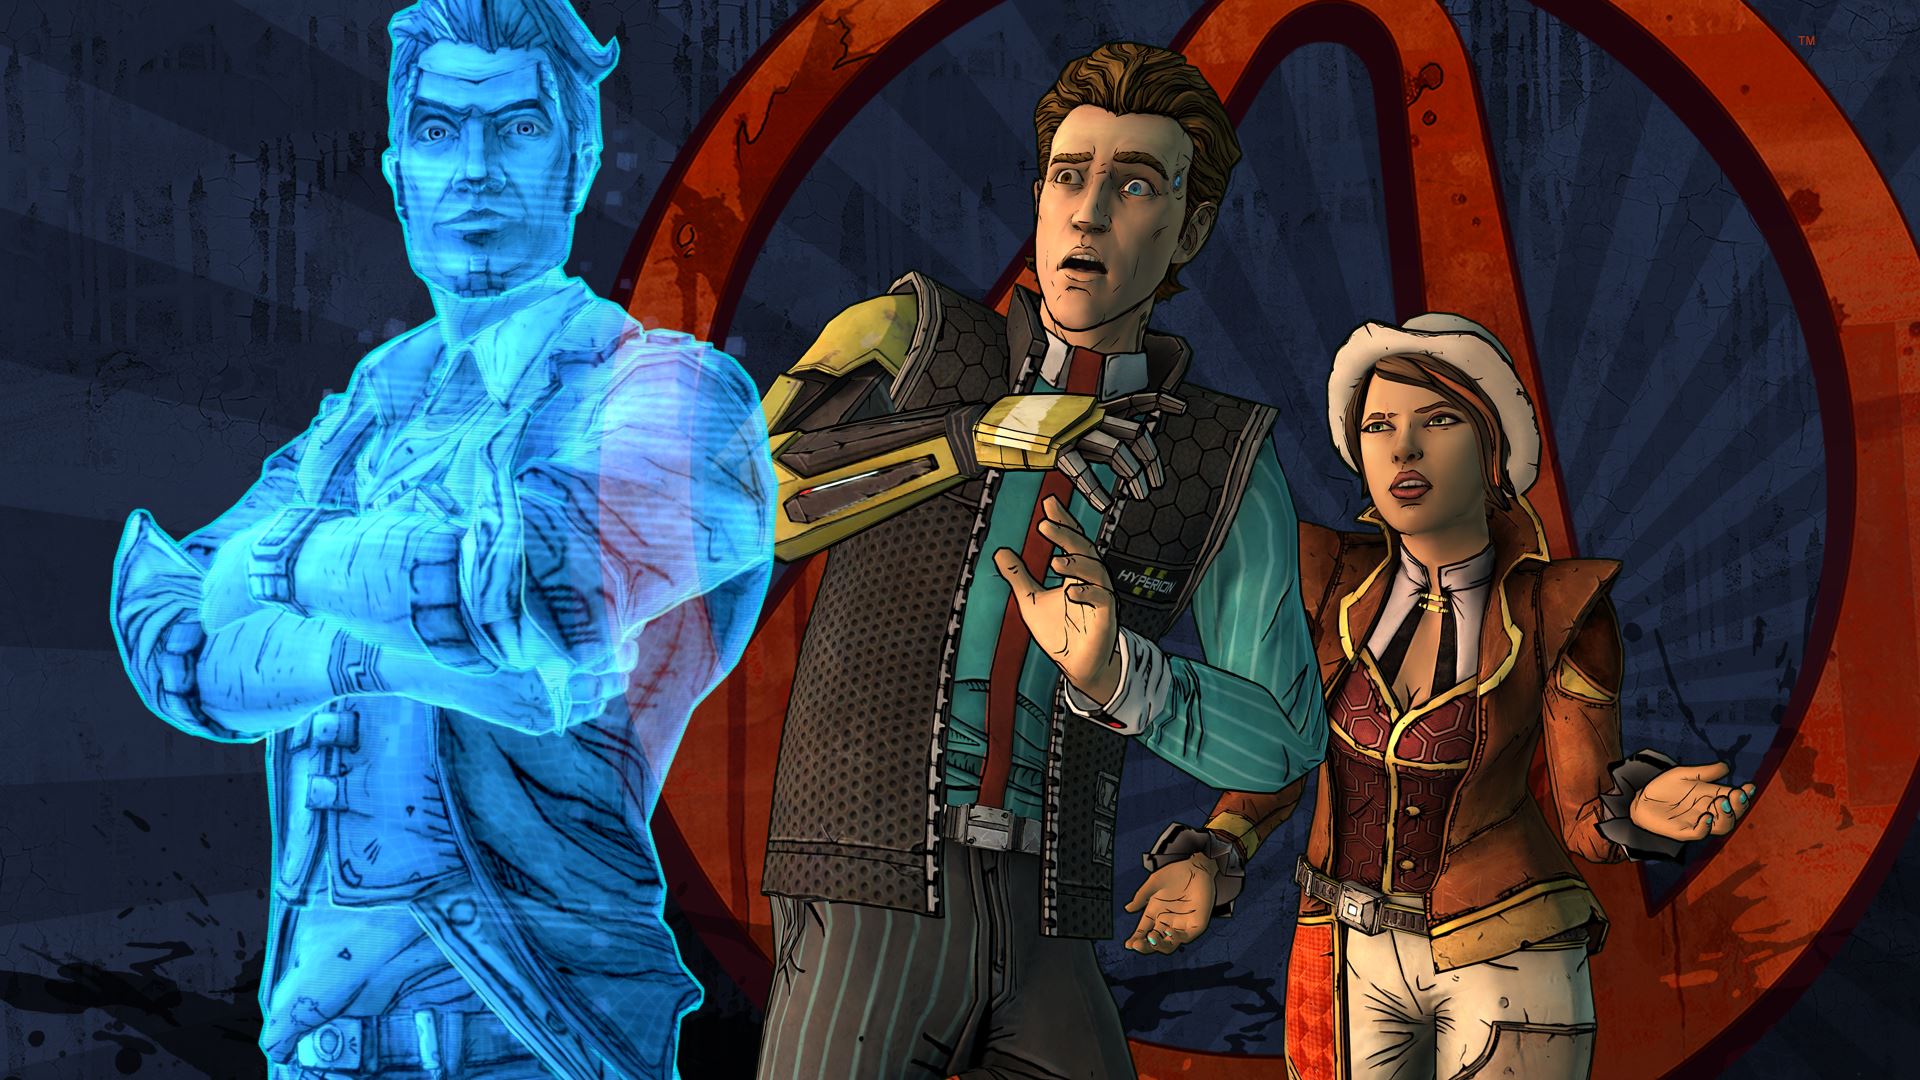 video game, tales from the borderlands, borderlands